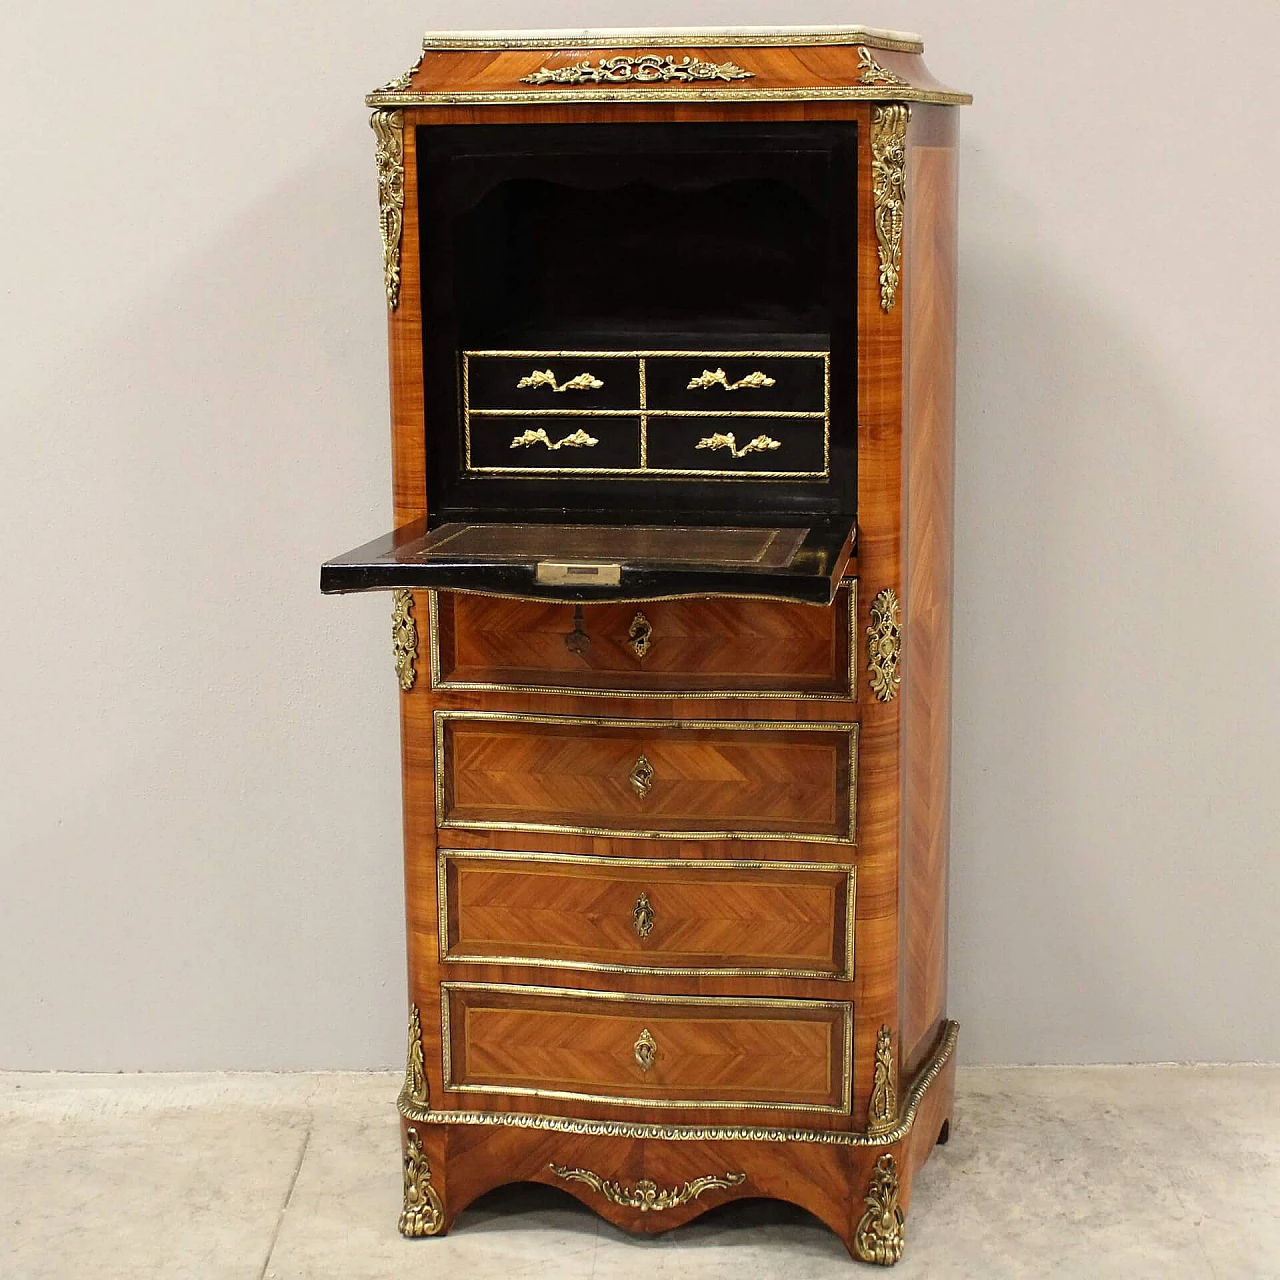 Napoleon III secretaire in bois de rose, rosewood inlay and gilded bronze with marble top, 19th century 5